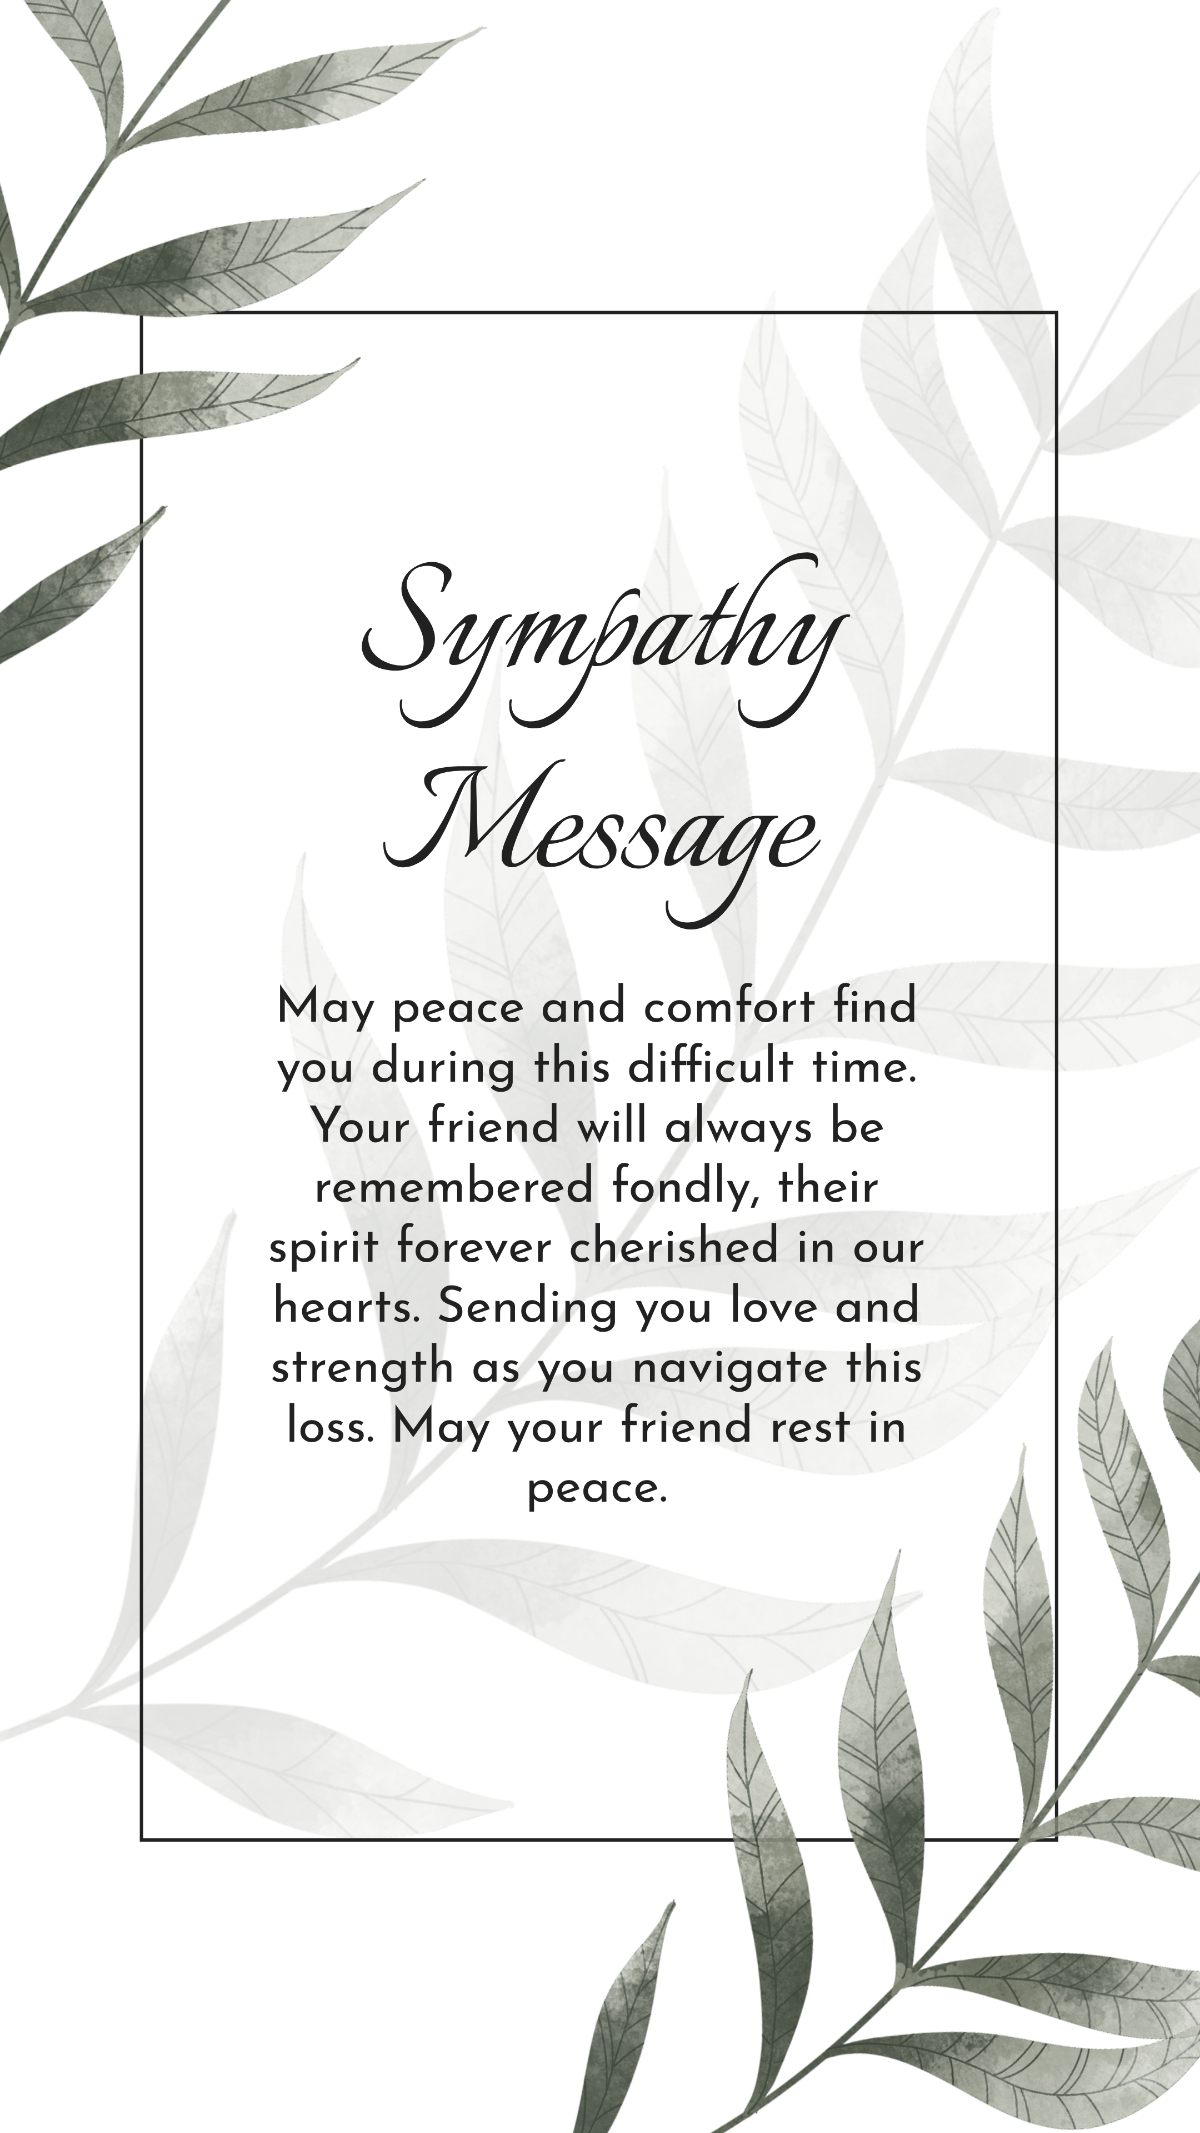 Rest in Peace sympathy message Template